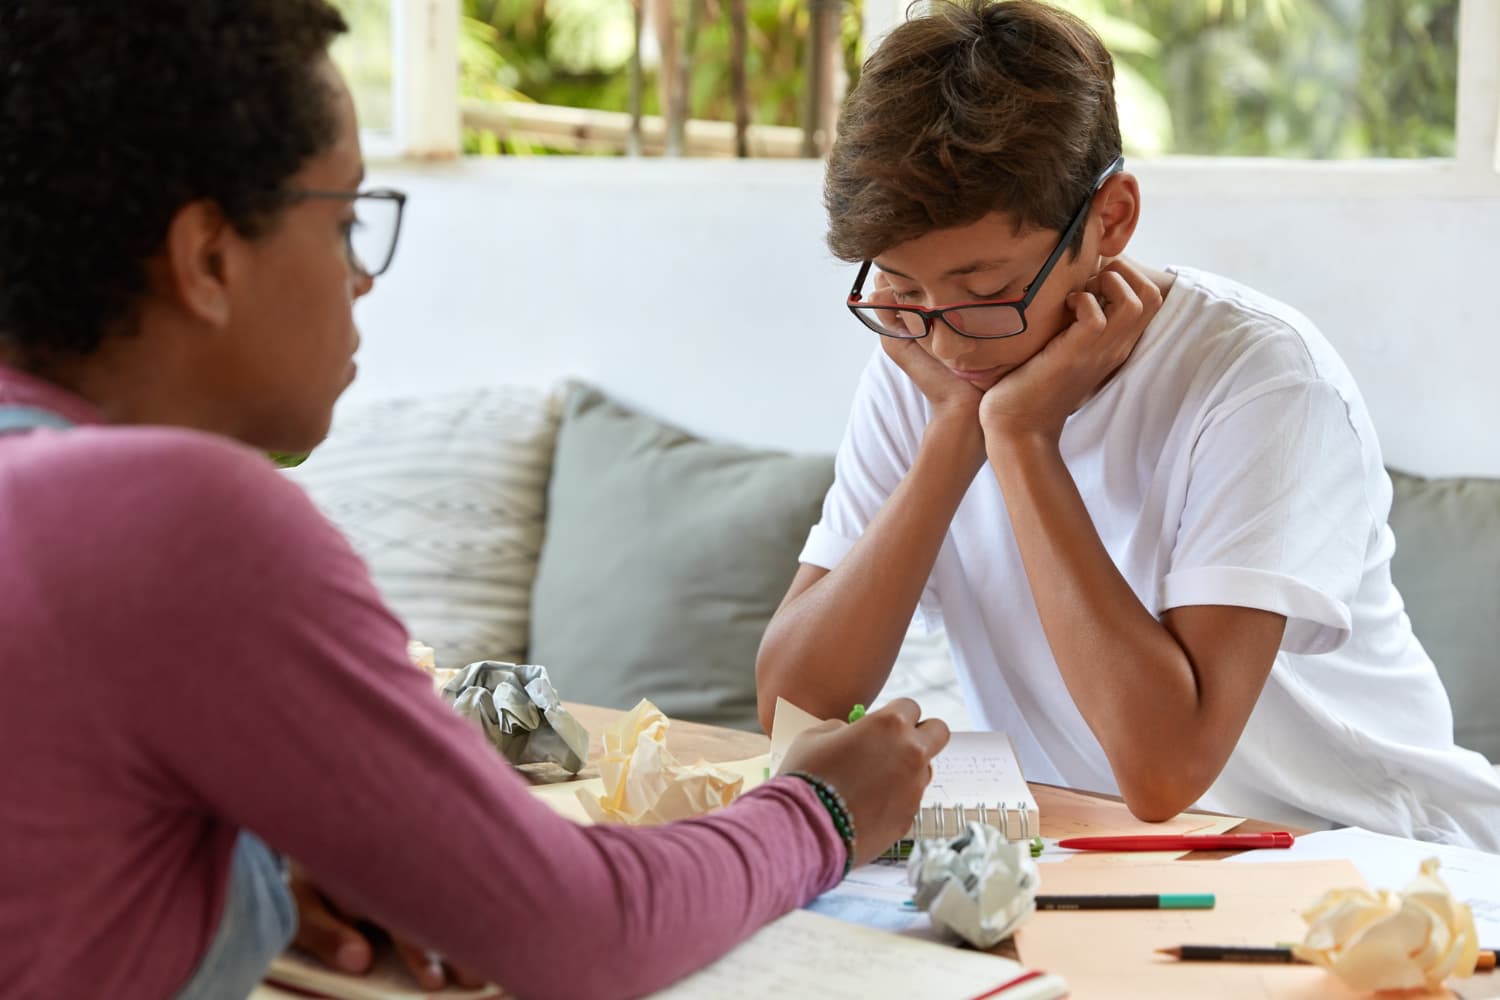 Teen Depression Counseling